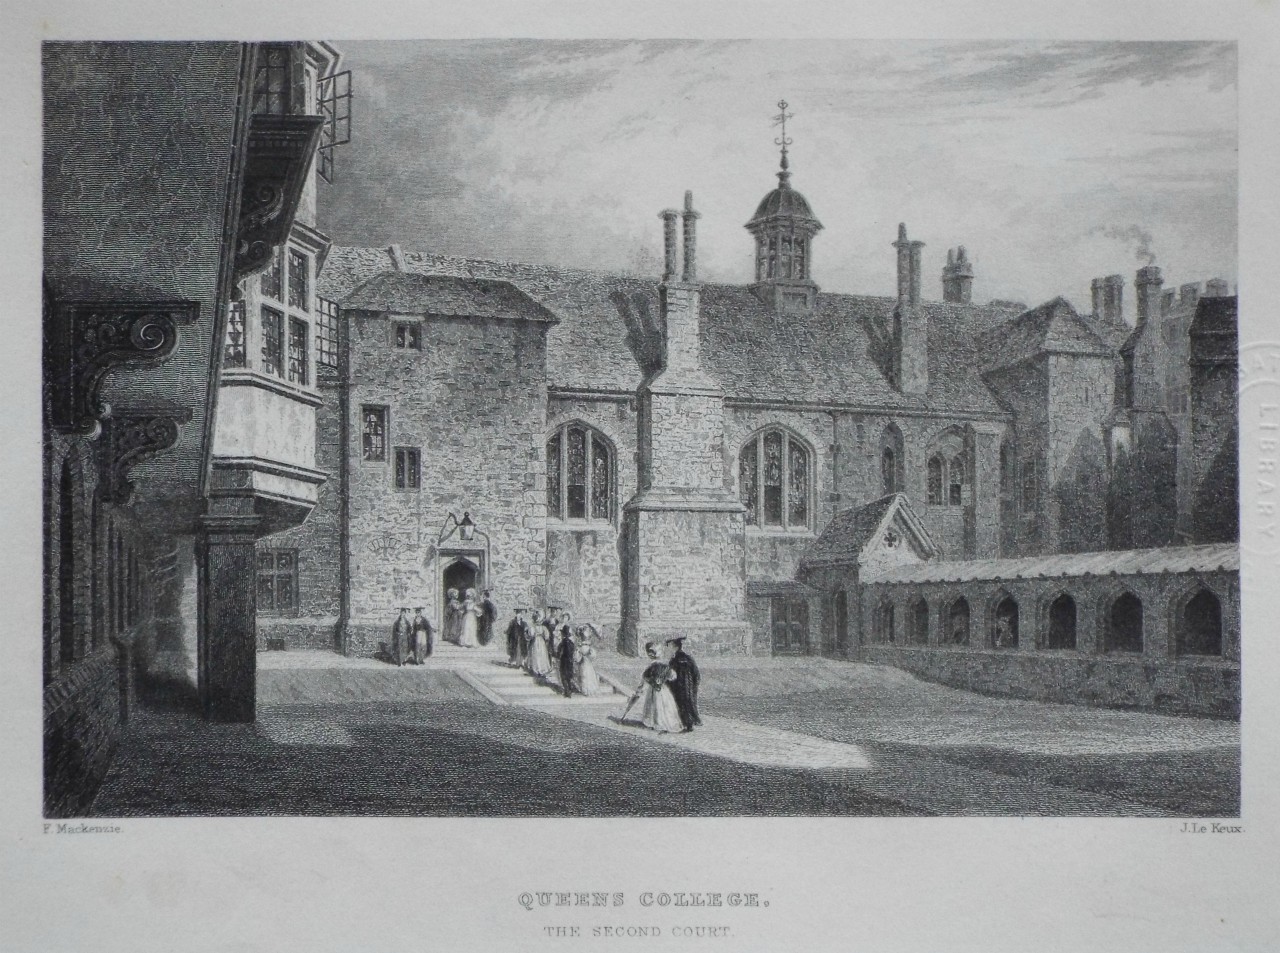 Print - Queens College. The Second Court. - Le